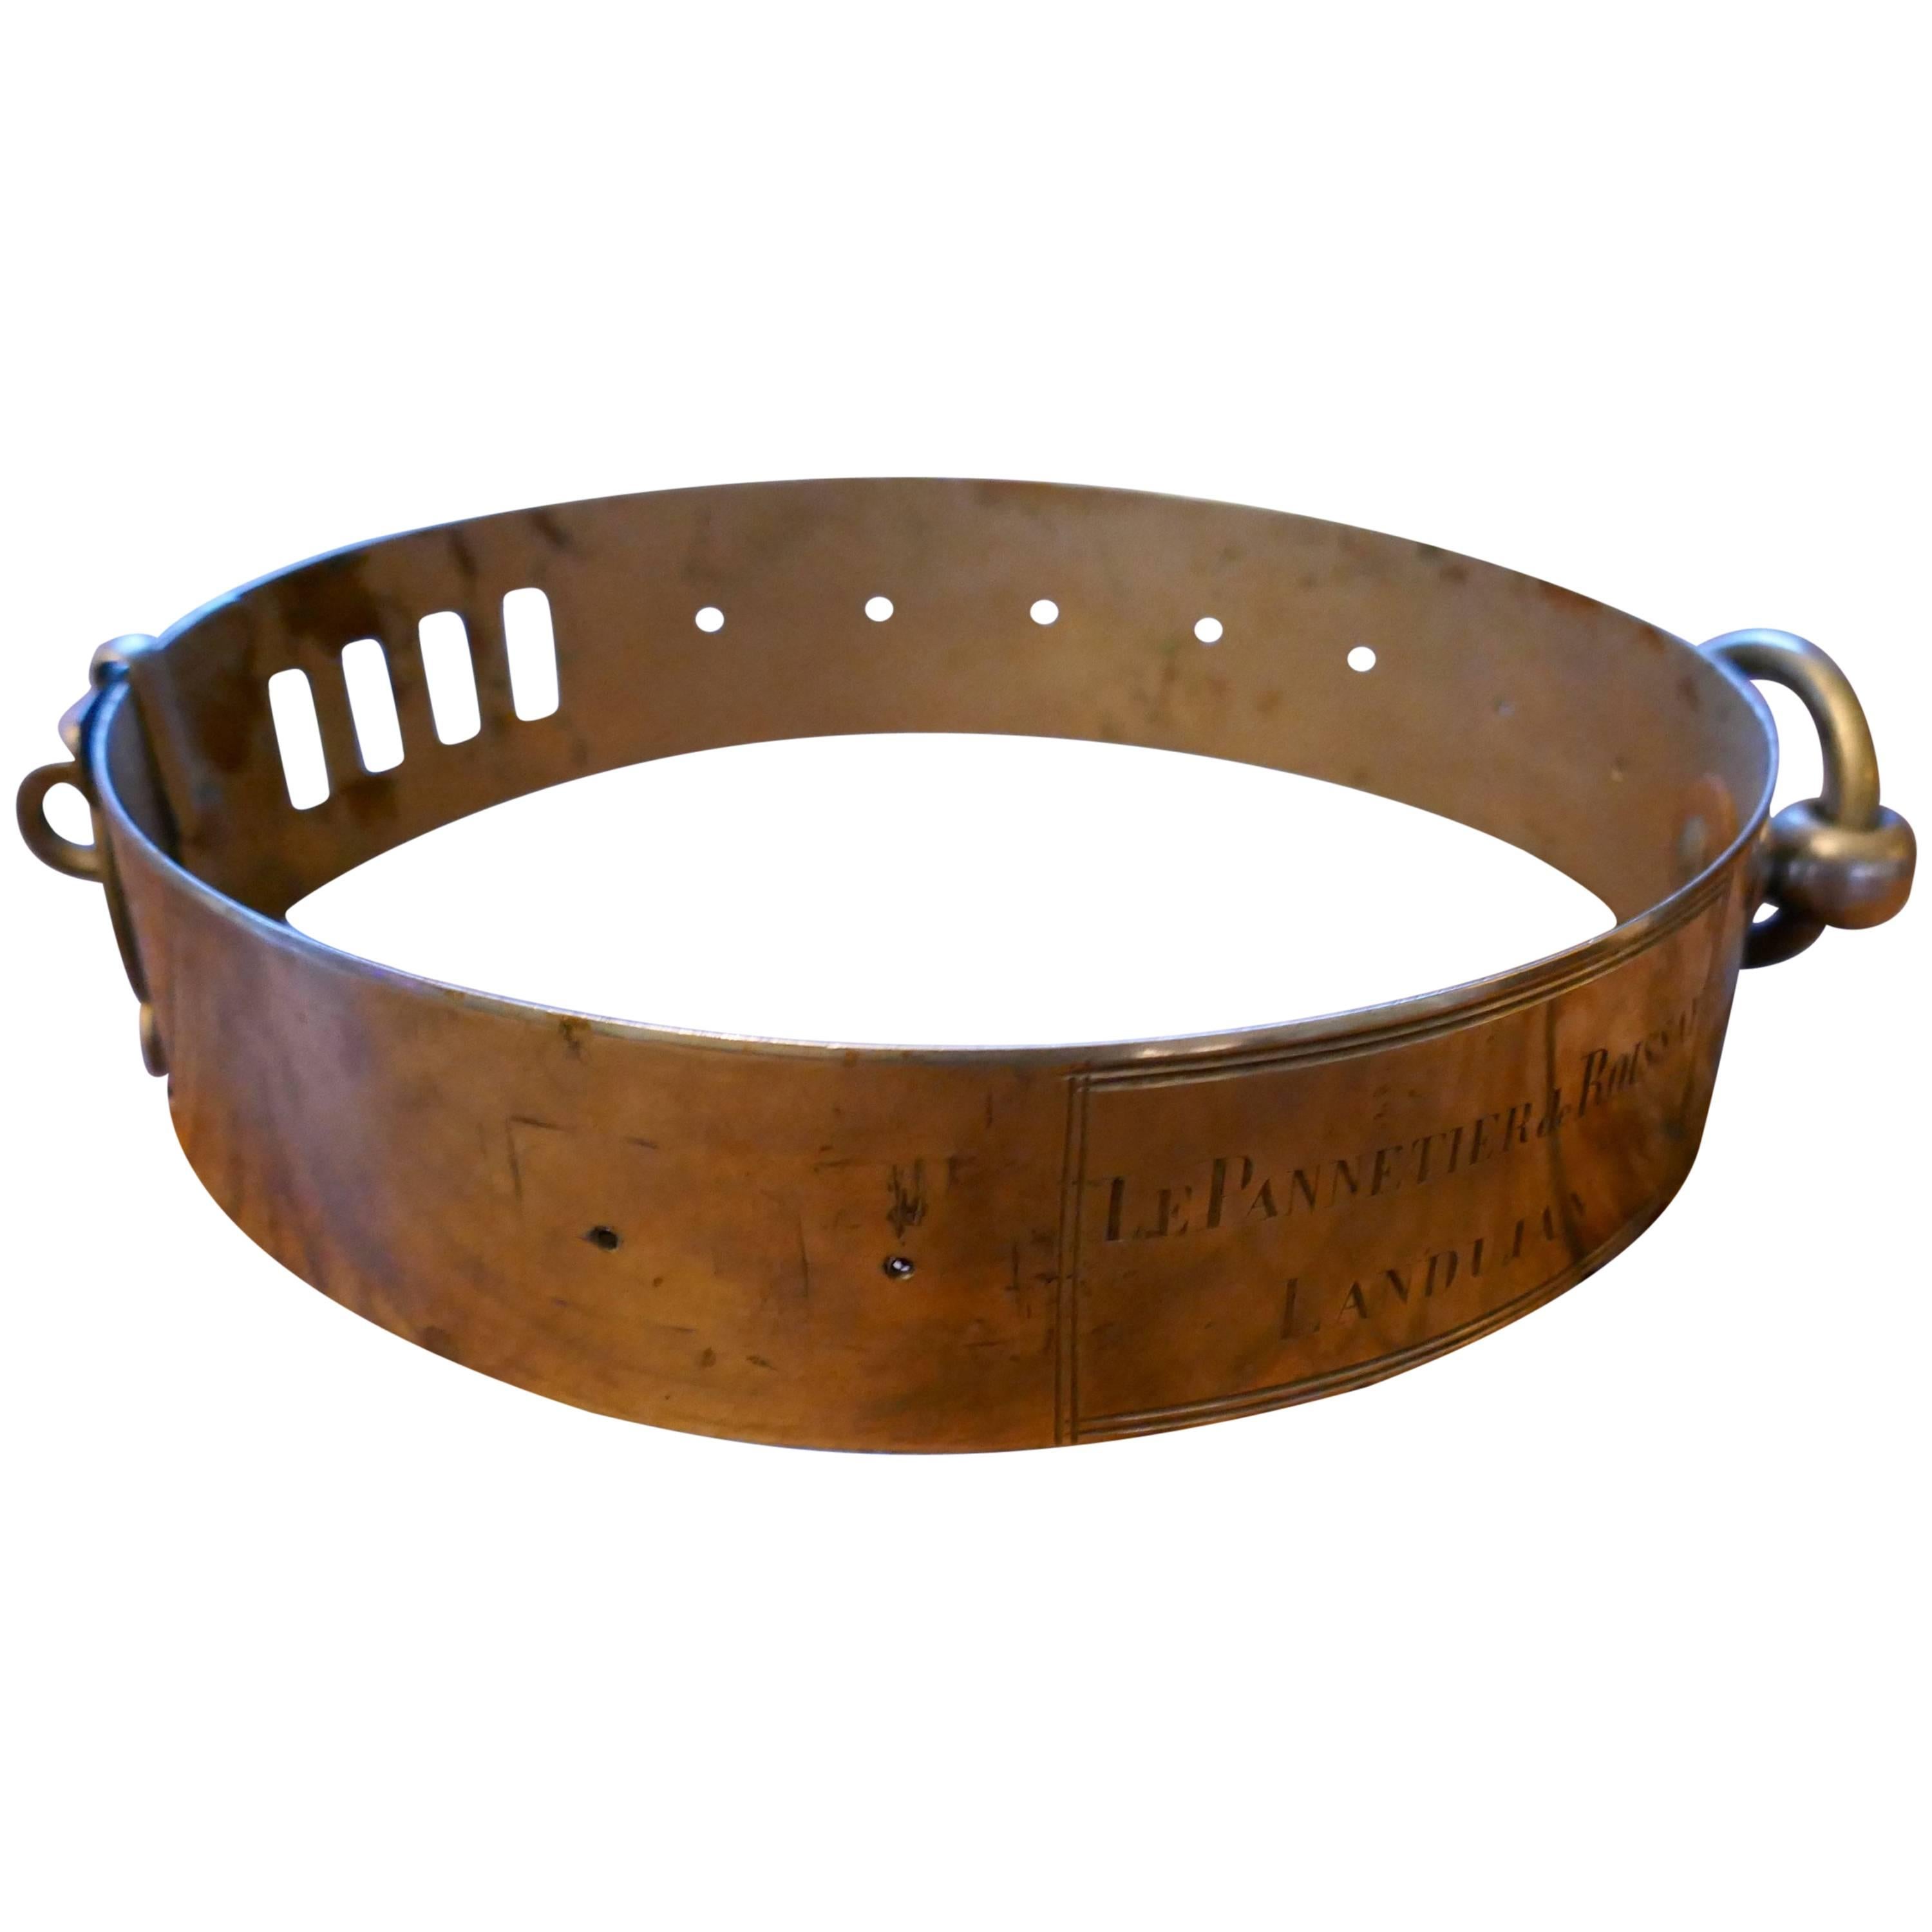 19th Century French Nickel Silver Hunting Dog Collar, Engraved Provenance